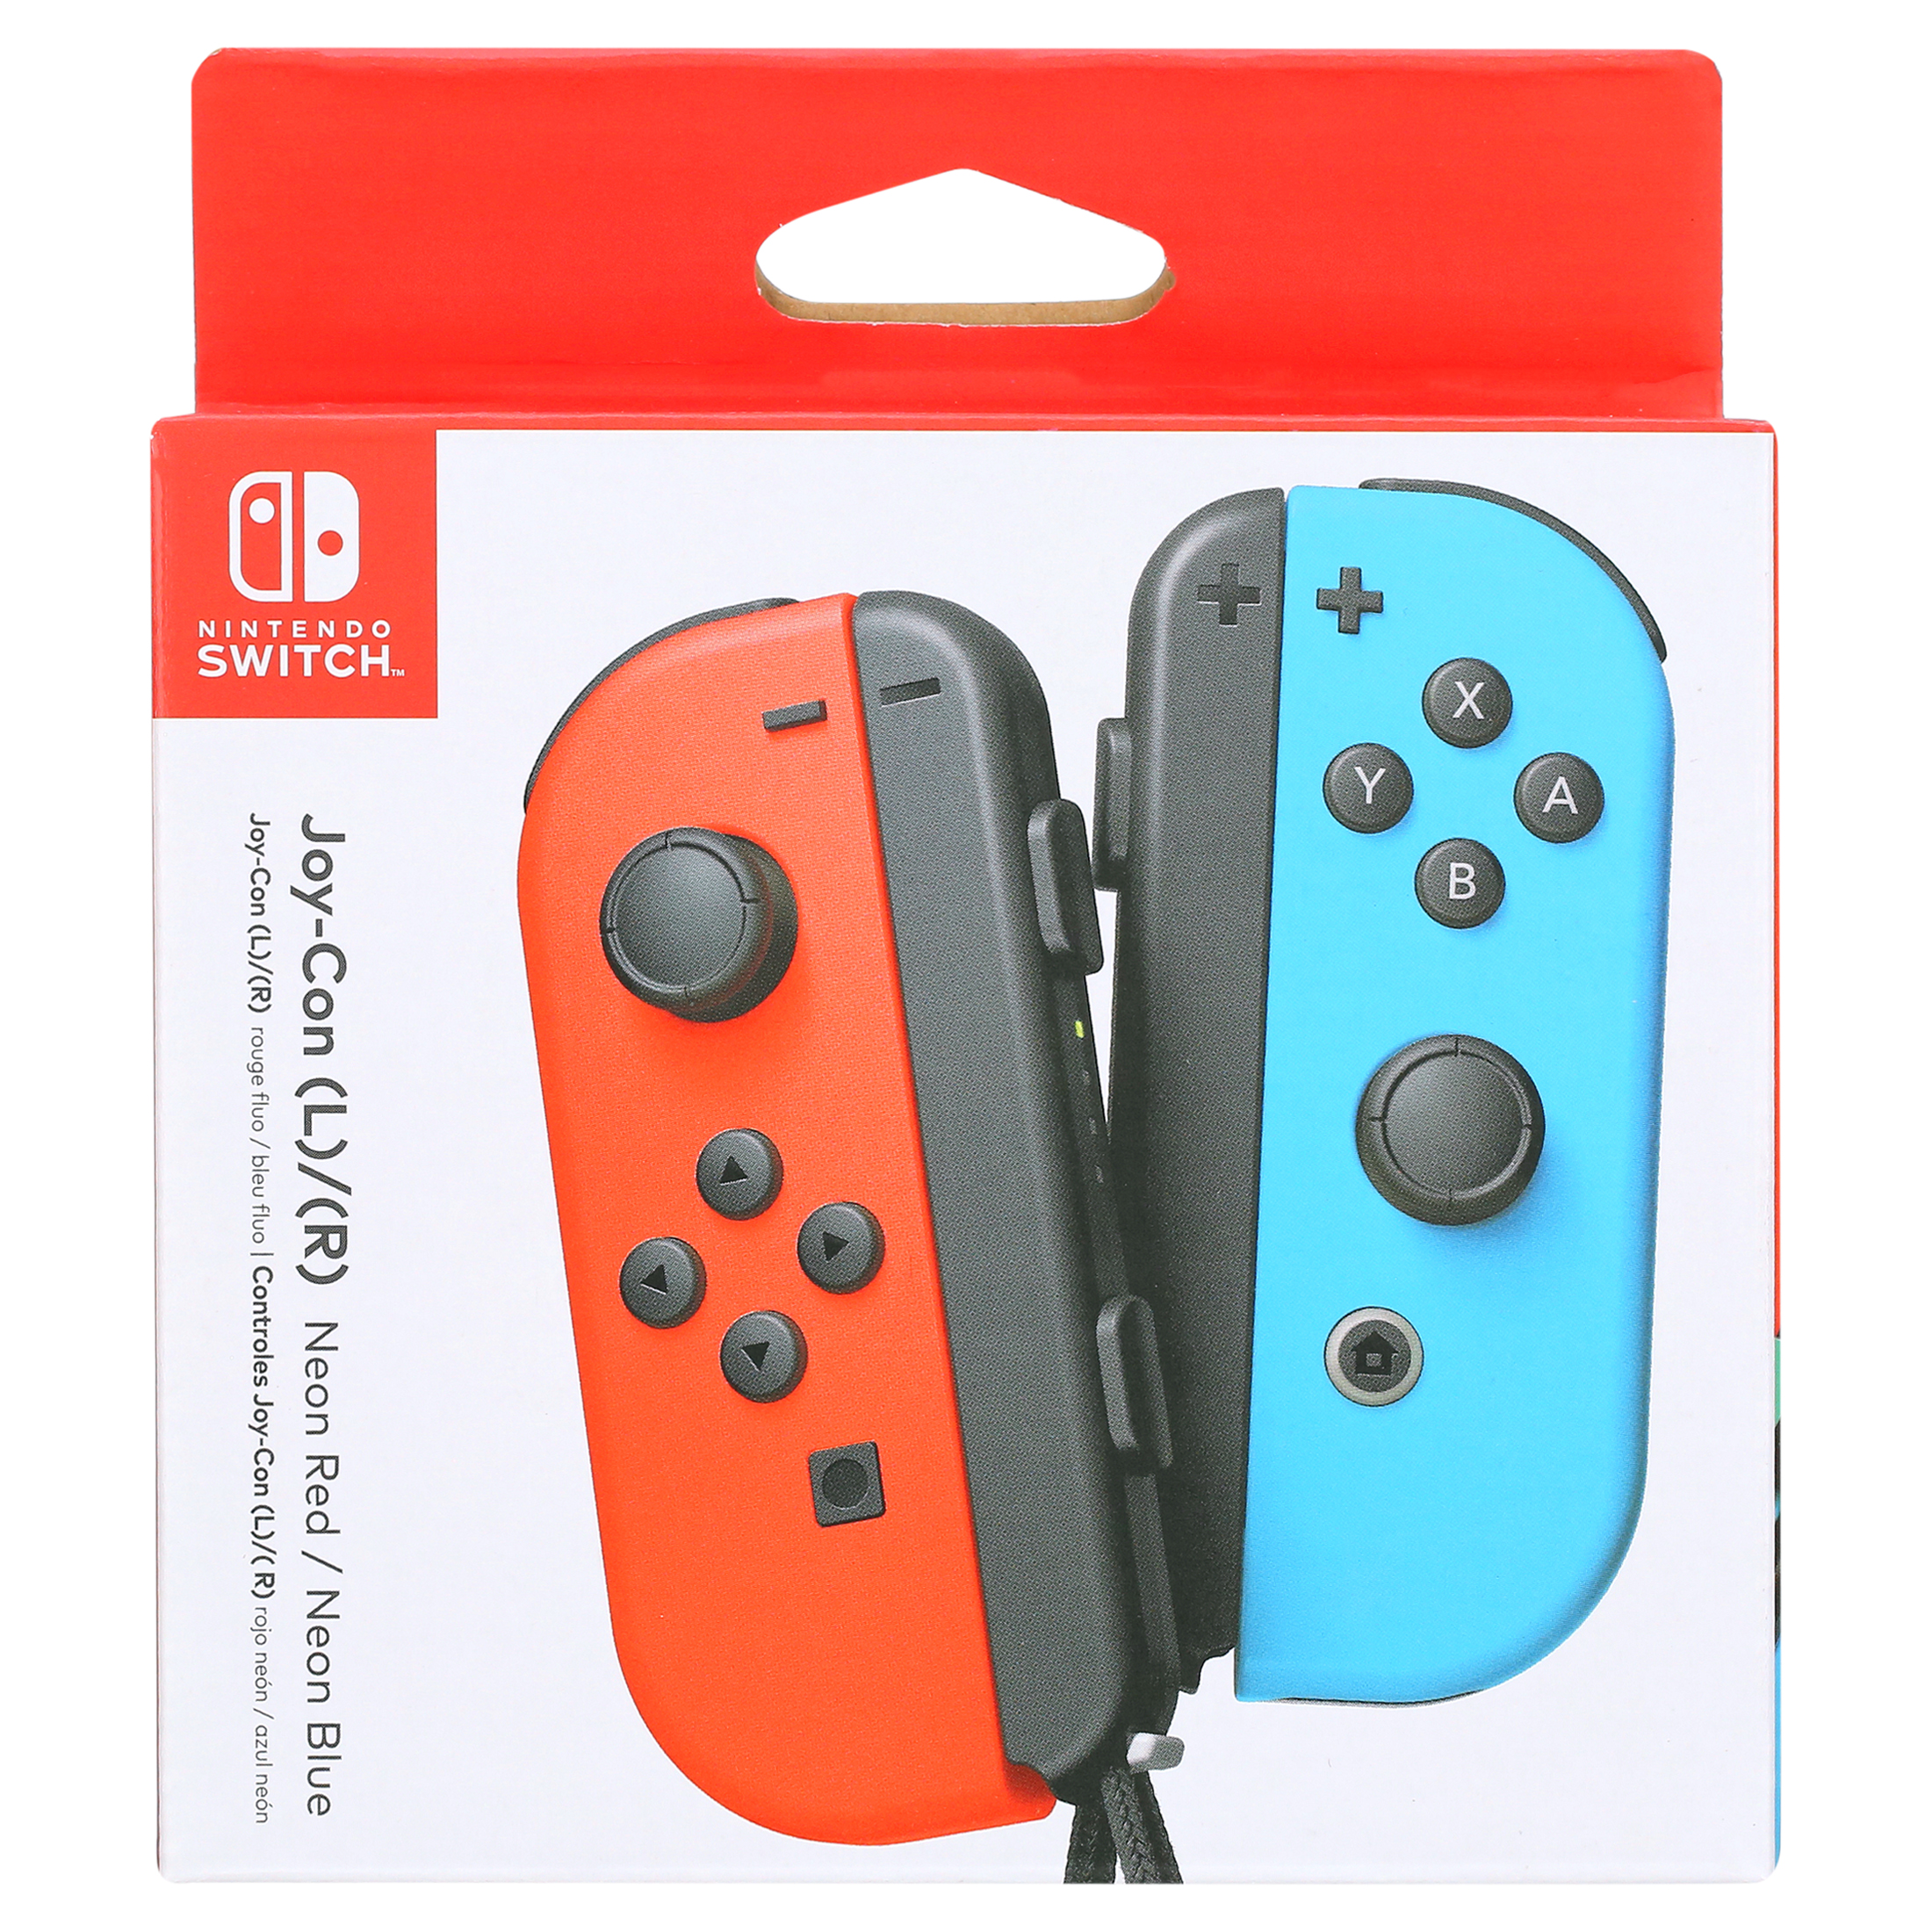 Nintendo Switch - Joy-Con (L/R) - Left Neon Red/ Right Neon Blue Controllers - image 2 of 6